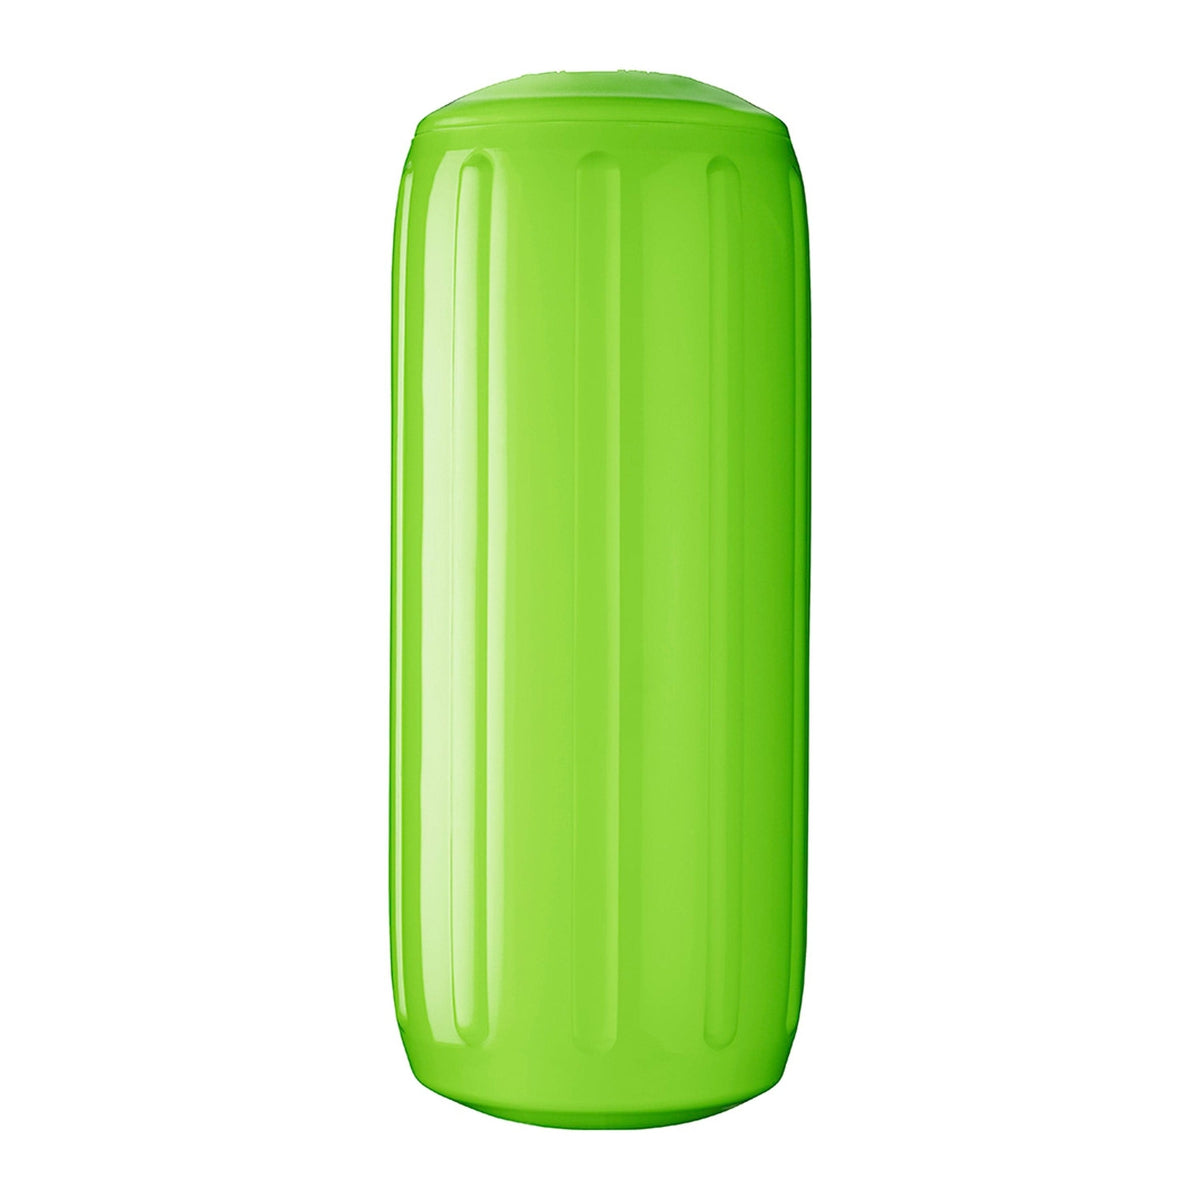 Polyform U.S. Qualifies for Free Shipping Polyform HTM-1 HTM-Series Fender 6.3" x 15.5" Lime #HTM-1-LIME